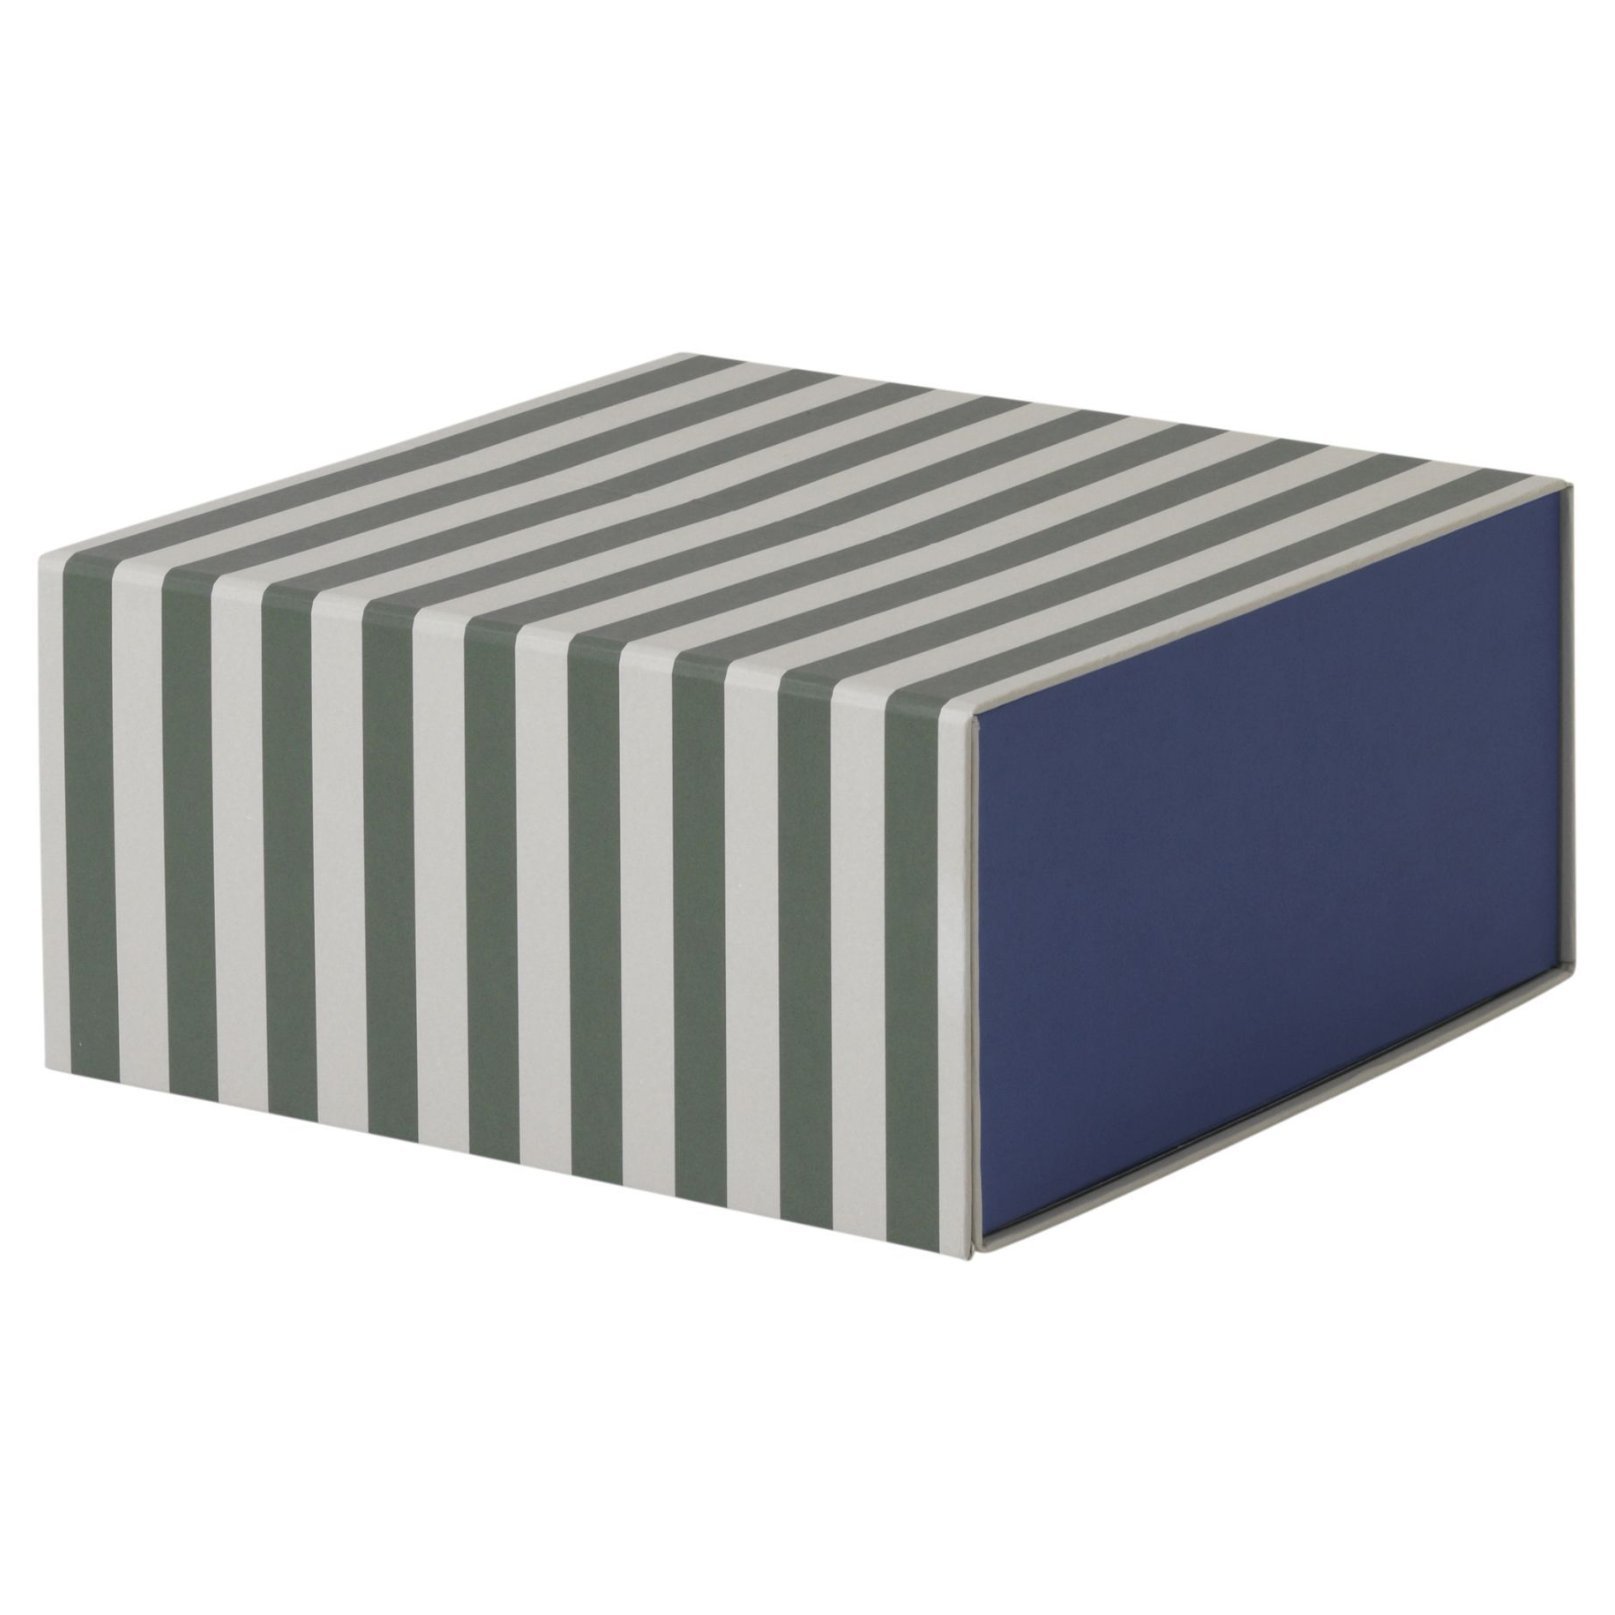 Square Striped Box in Green & Off White design by Ferm Living ...